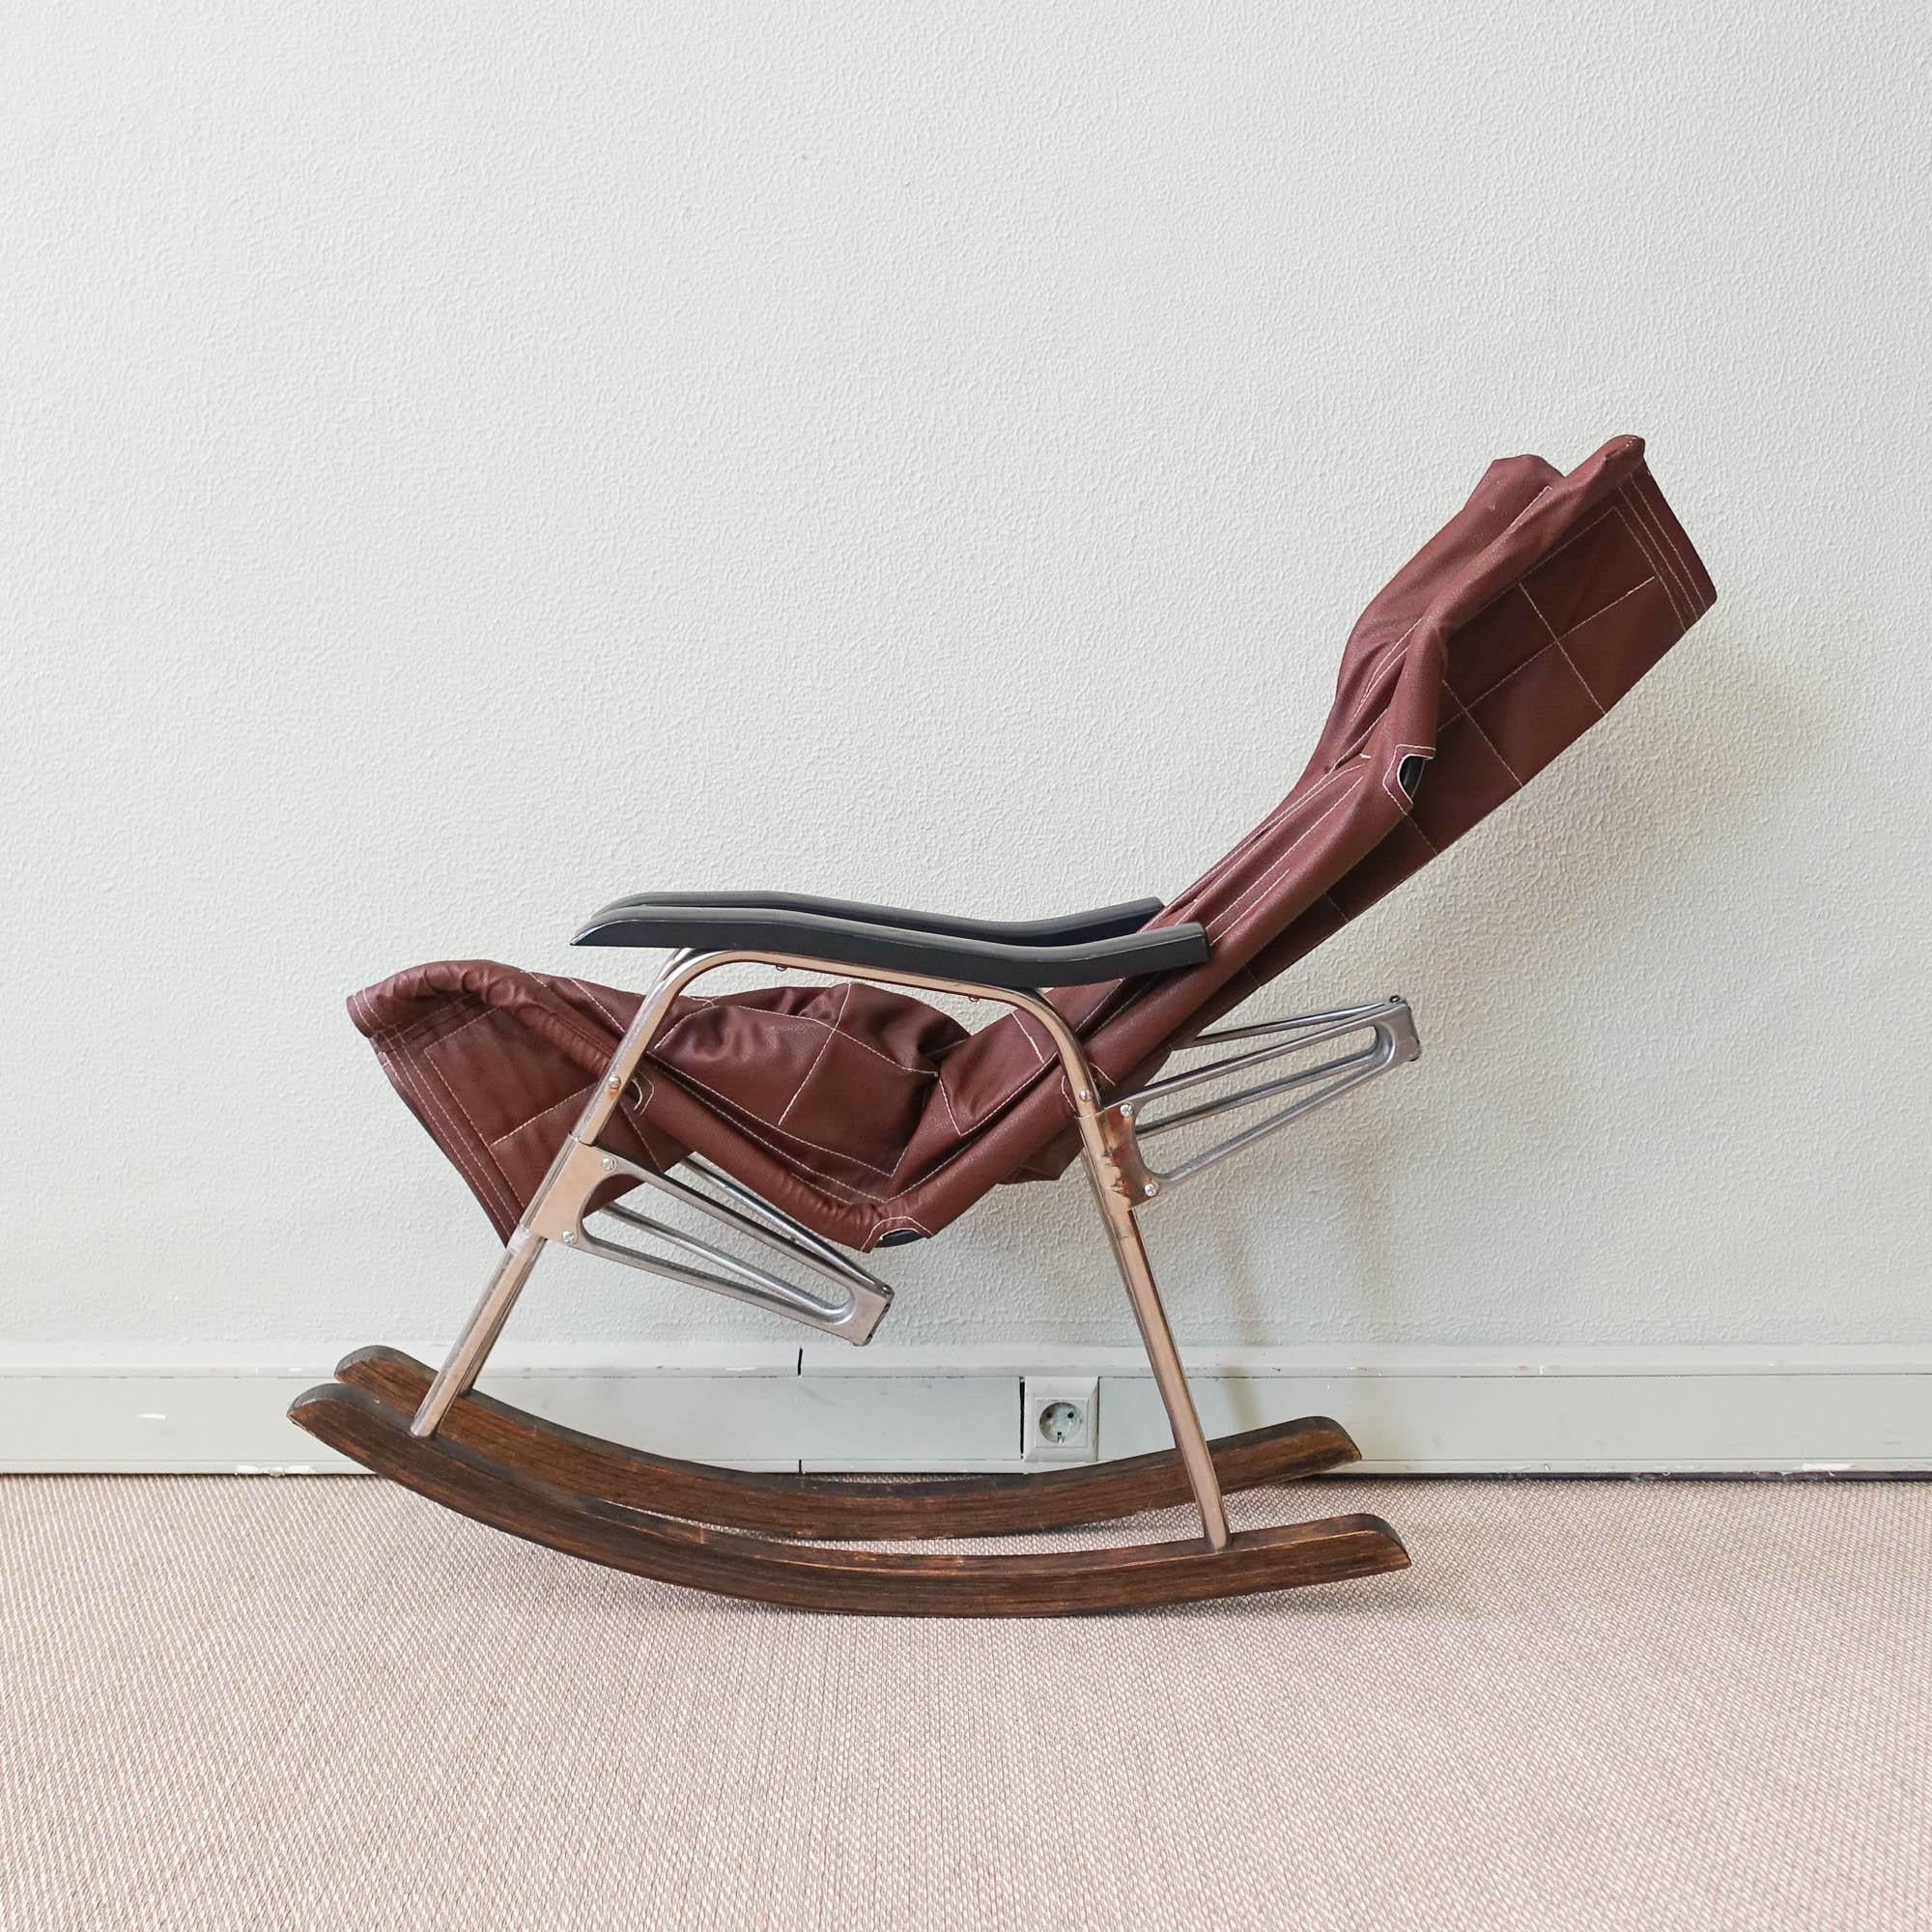 Japanese Foldable Rocking Chair by Takeshi Nii, 1950's For Sale 4